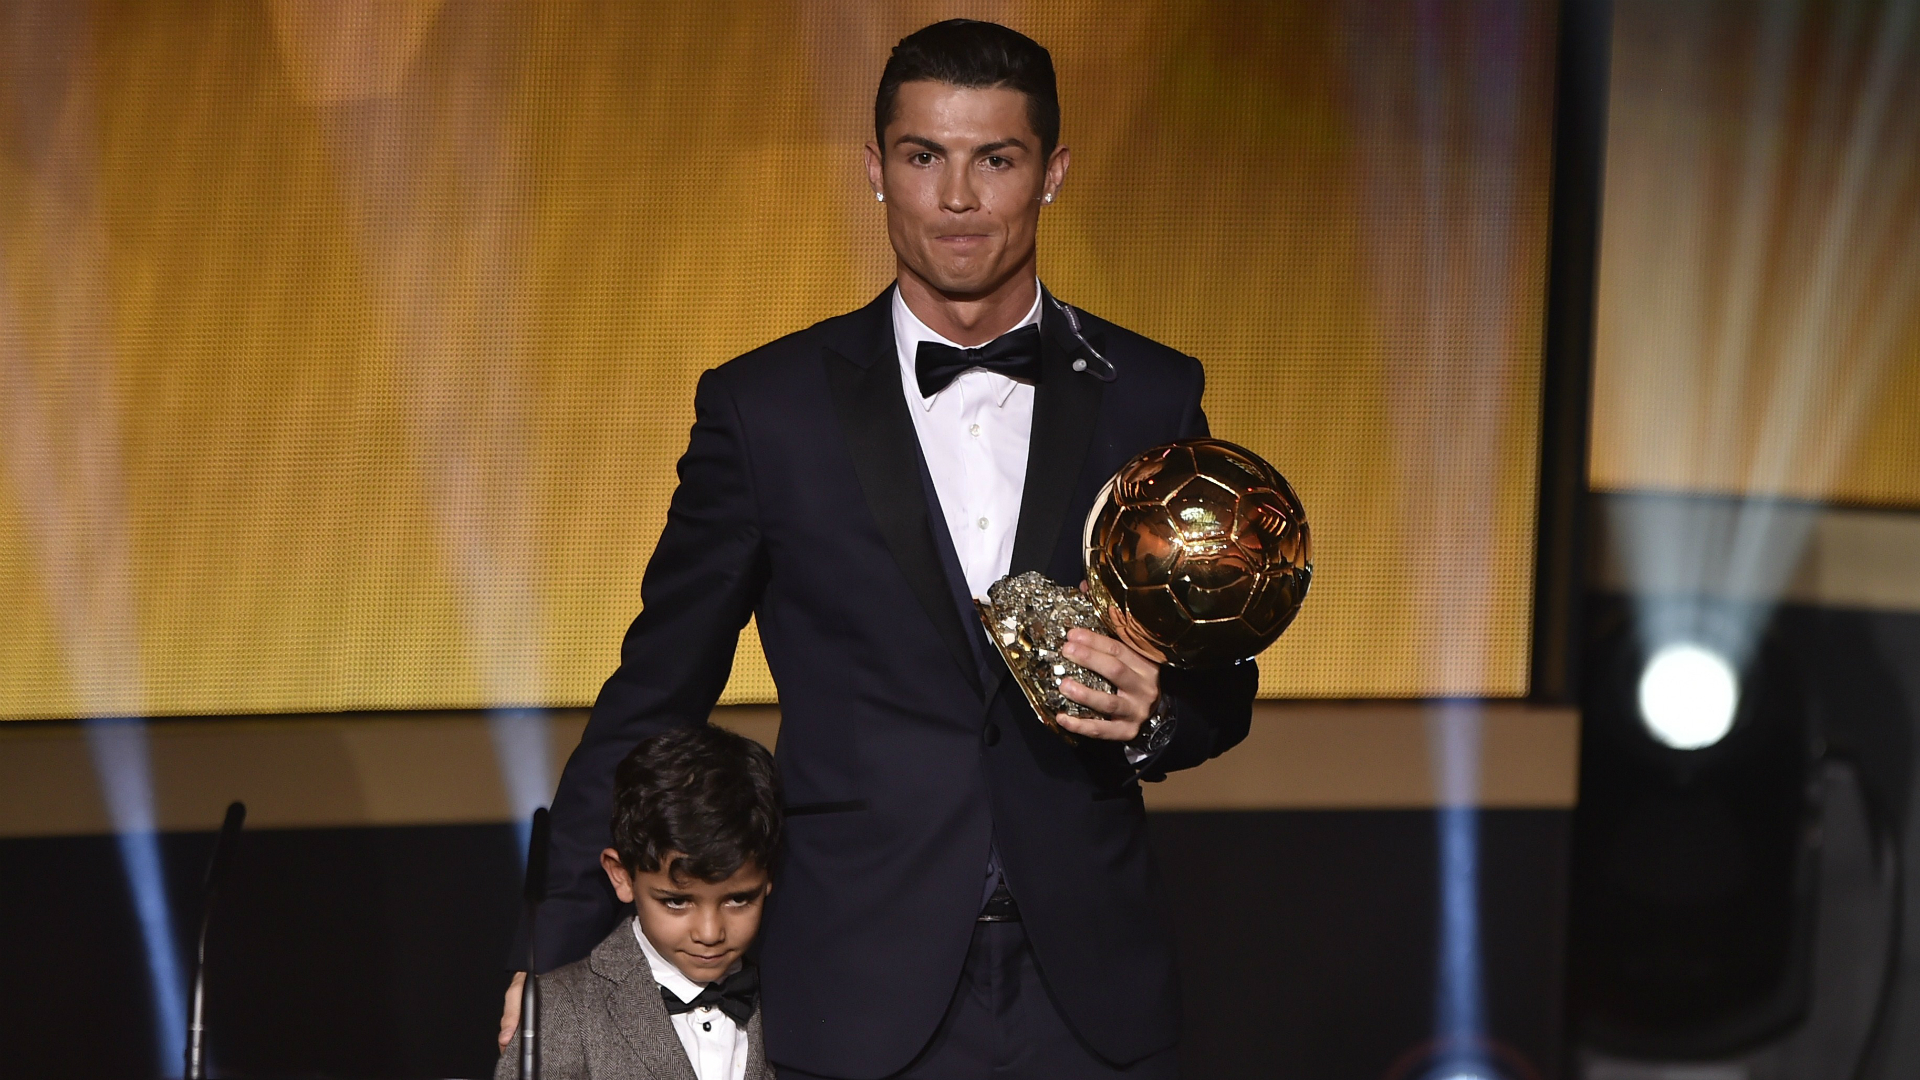 Cristiano Ronaldo Not Bothered If Lionel Messi Wins Ballon d'Or